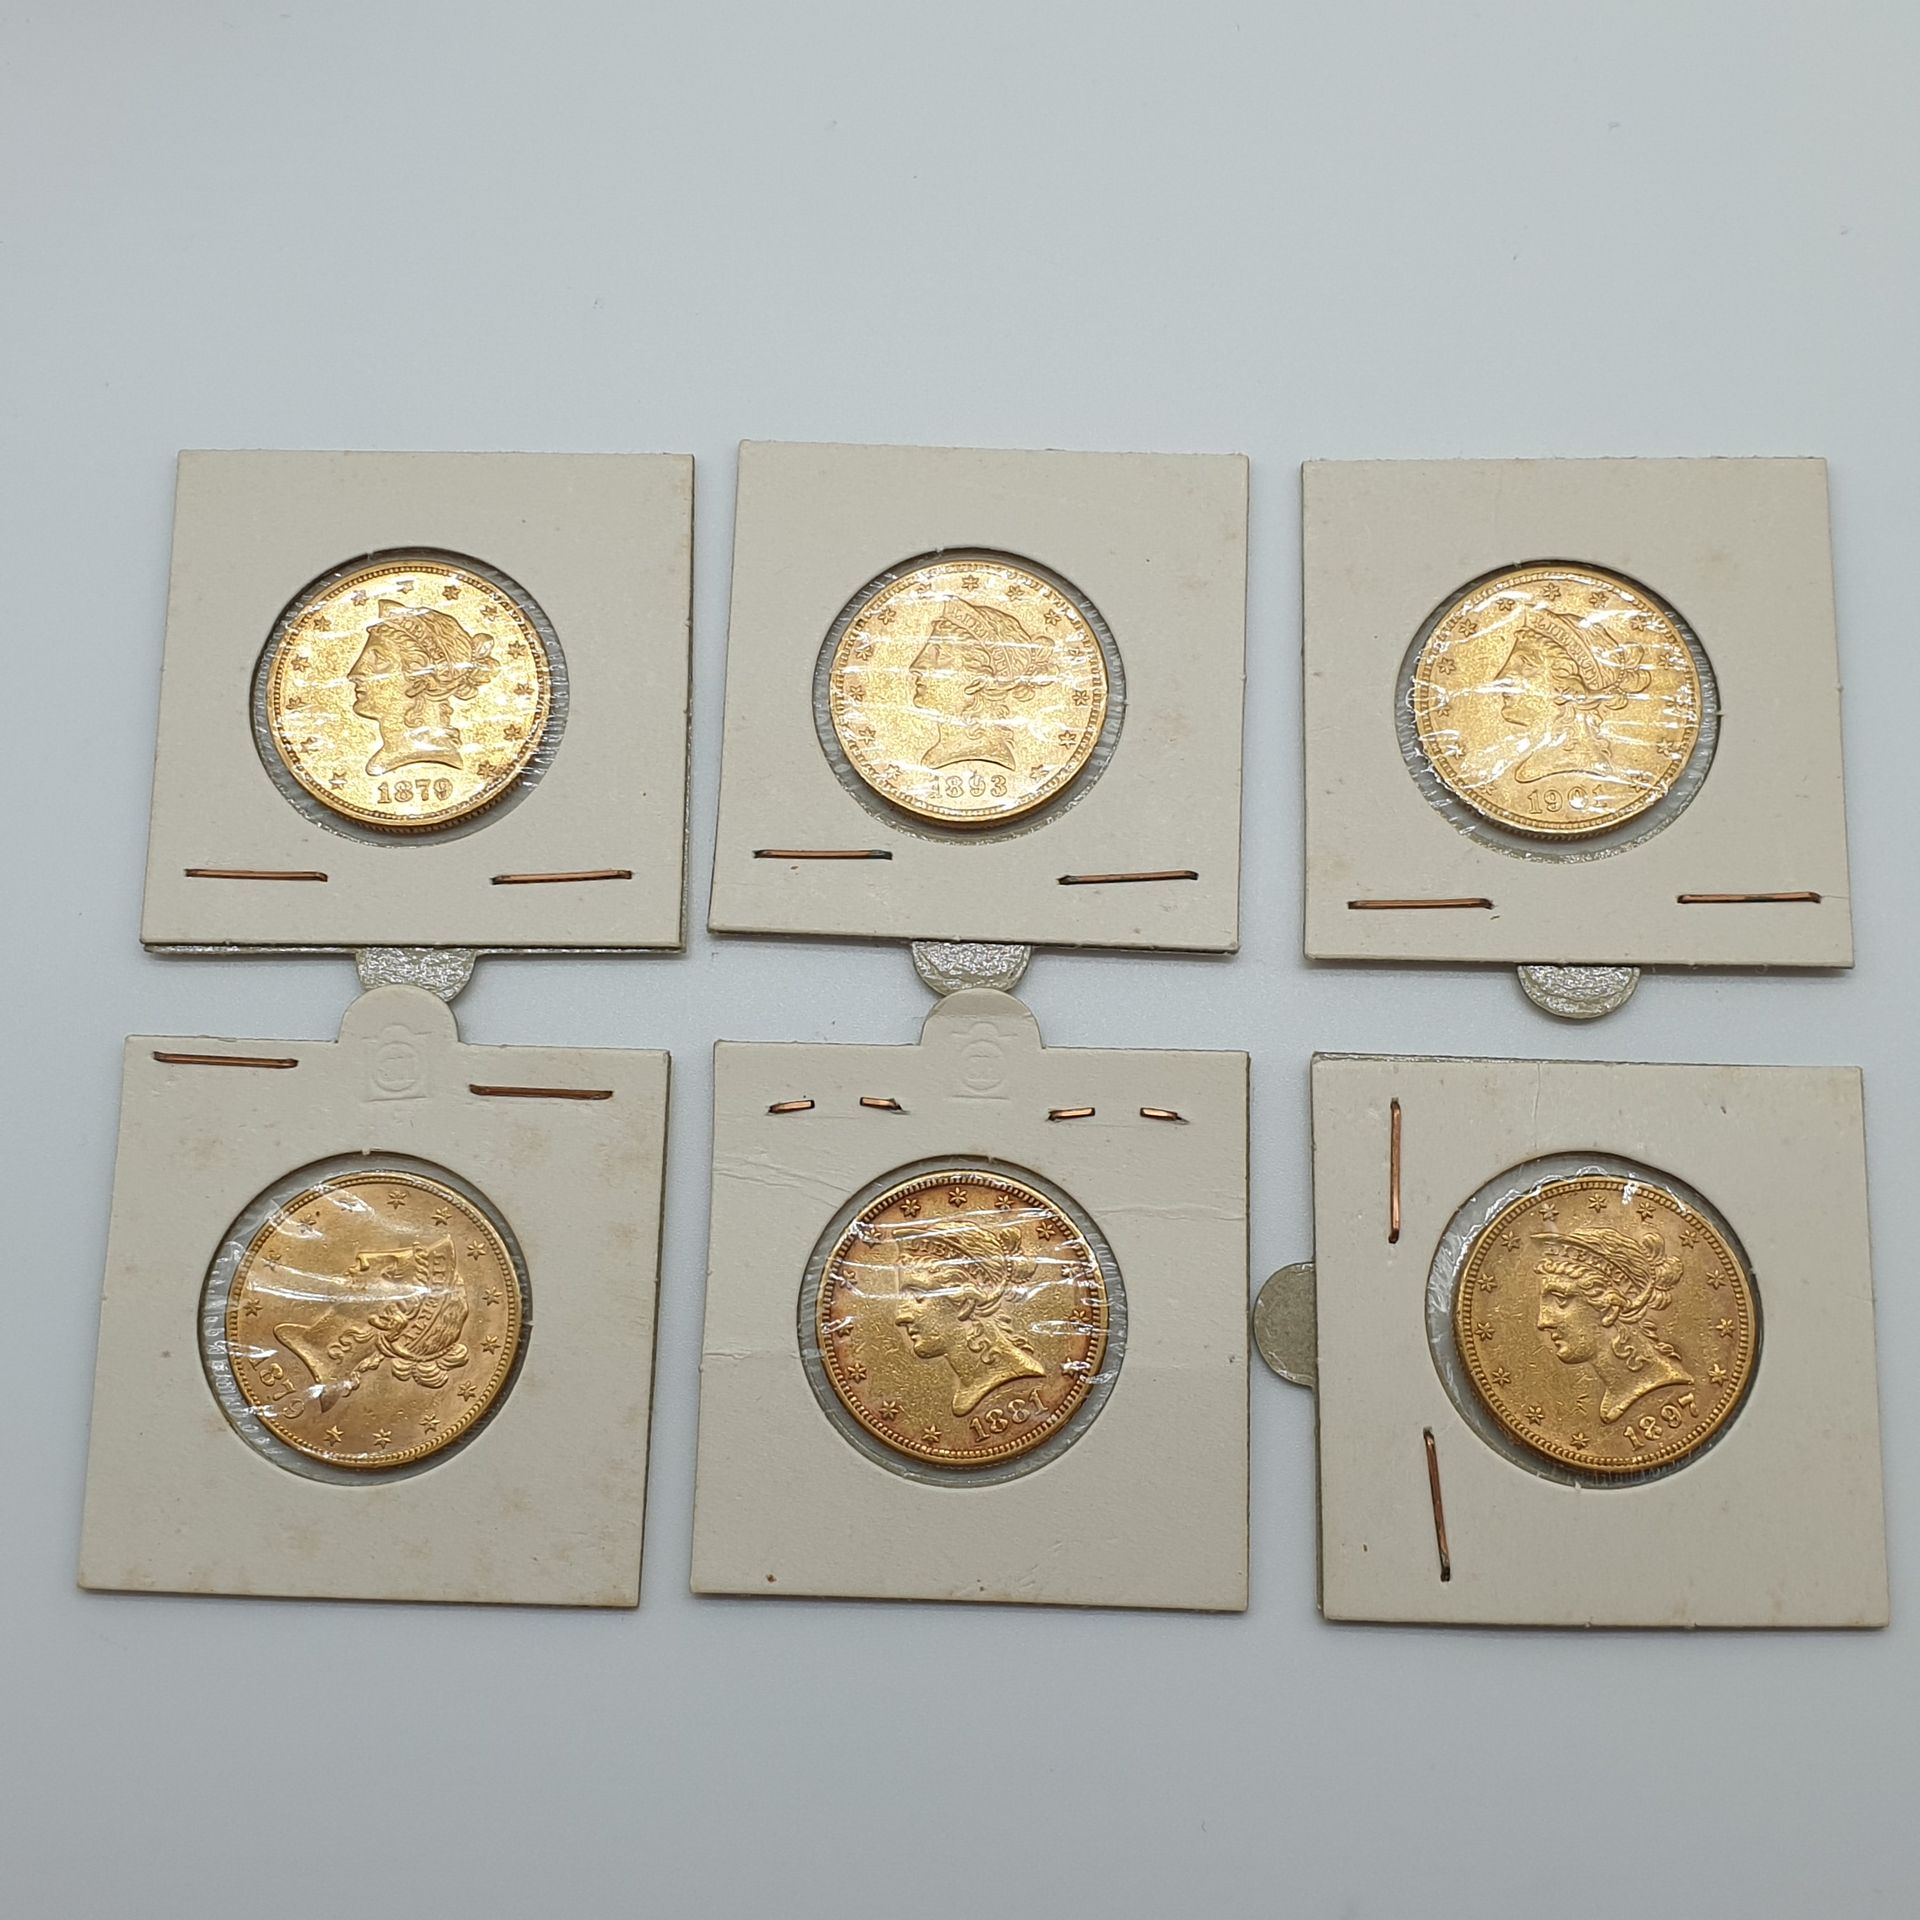 Null LOT OF SIX 10 DOLLAR GOLDEN PIECES 1893/1879/1901/1881/1897/1879

In bliste&hellip;